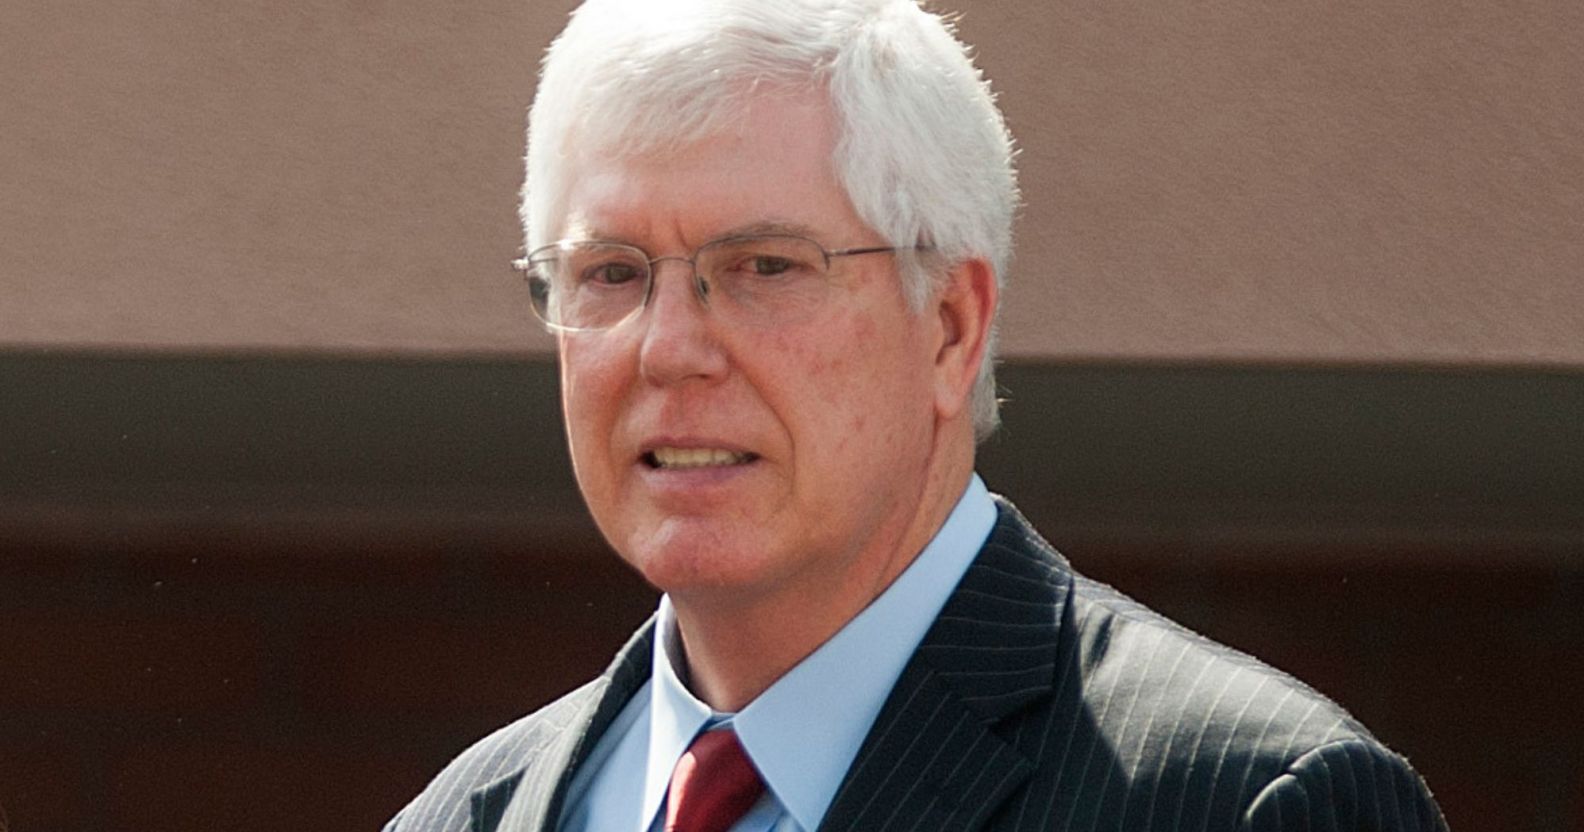 Mat Staver awkwardly smiles during a press conference.